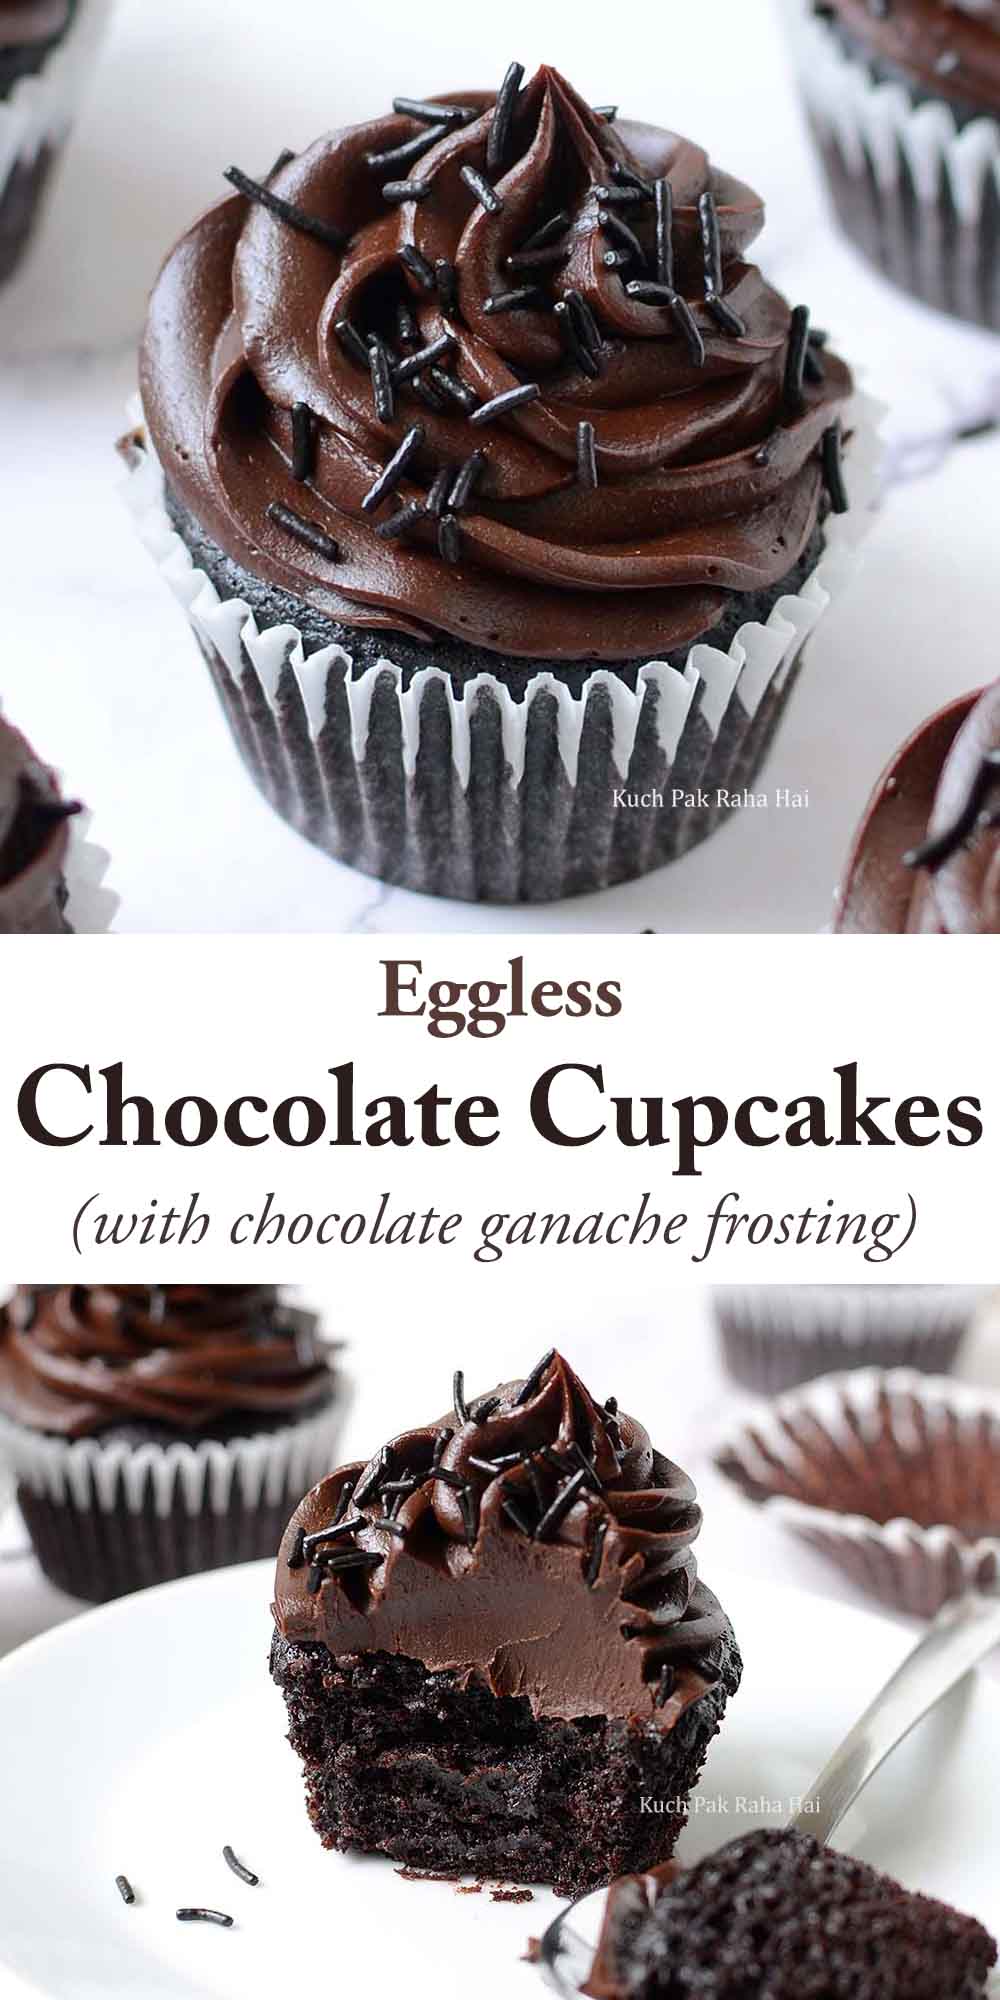 Eggless Chocolate Cupcakes with chocolate frosting